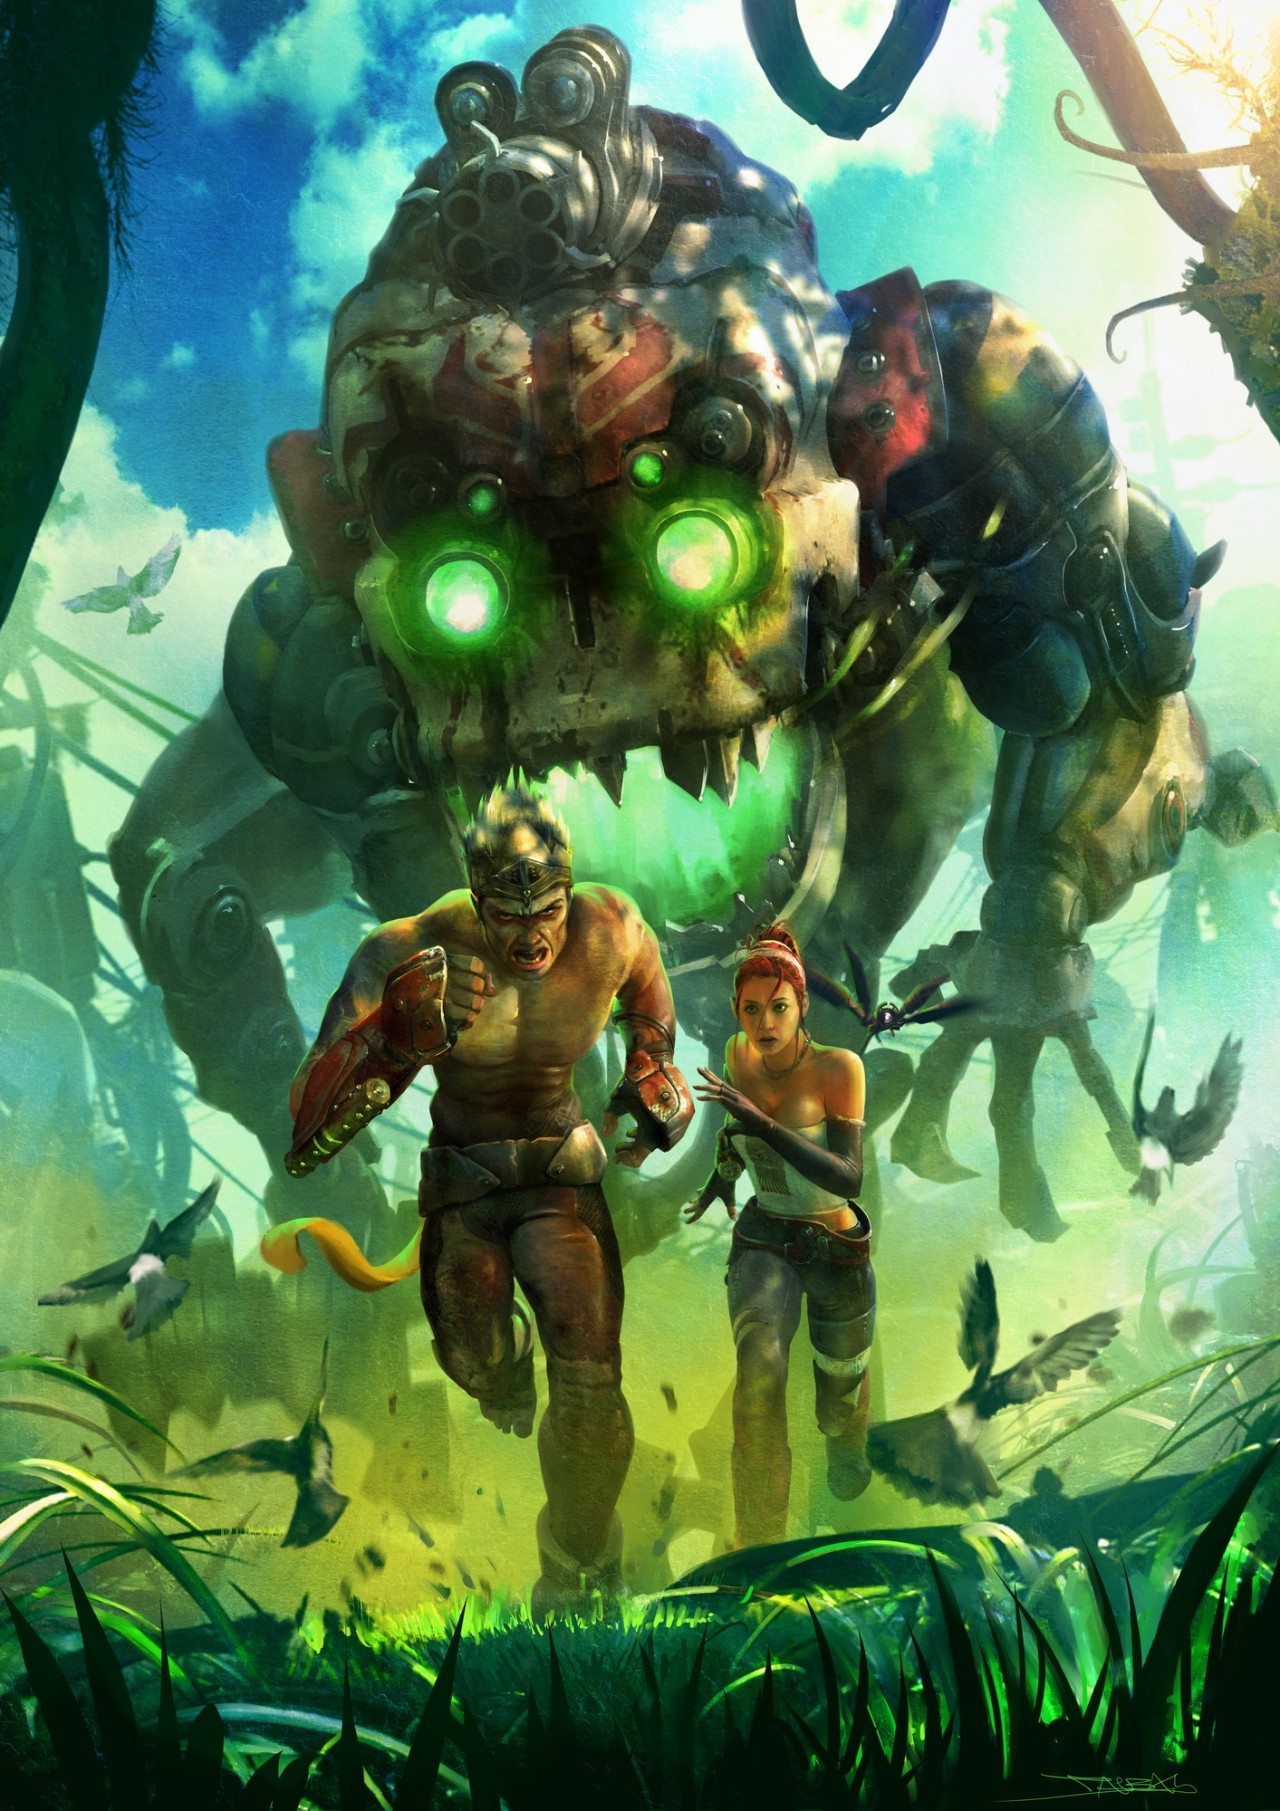 download enslaved odyssey to the west ps4